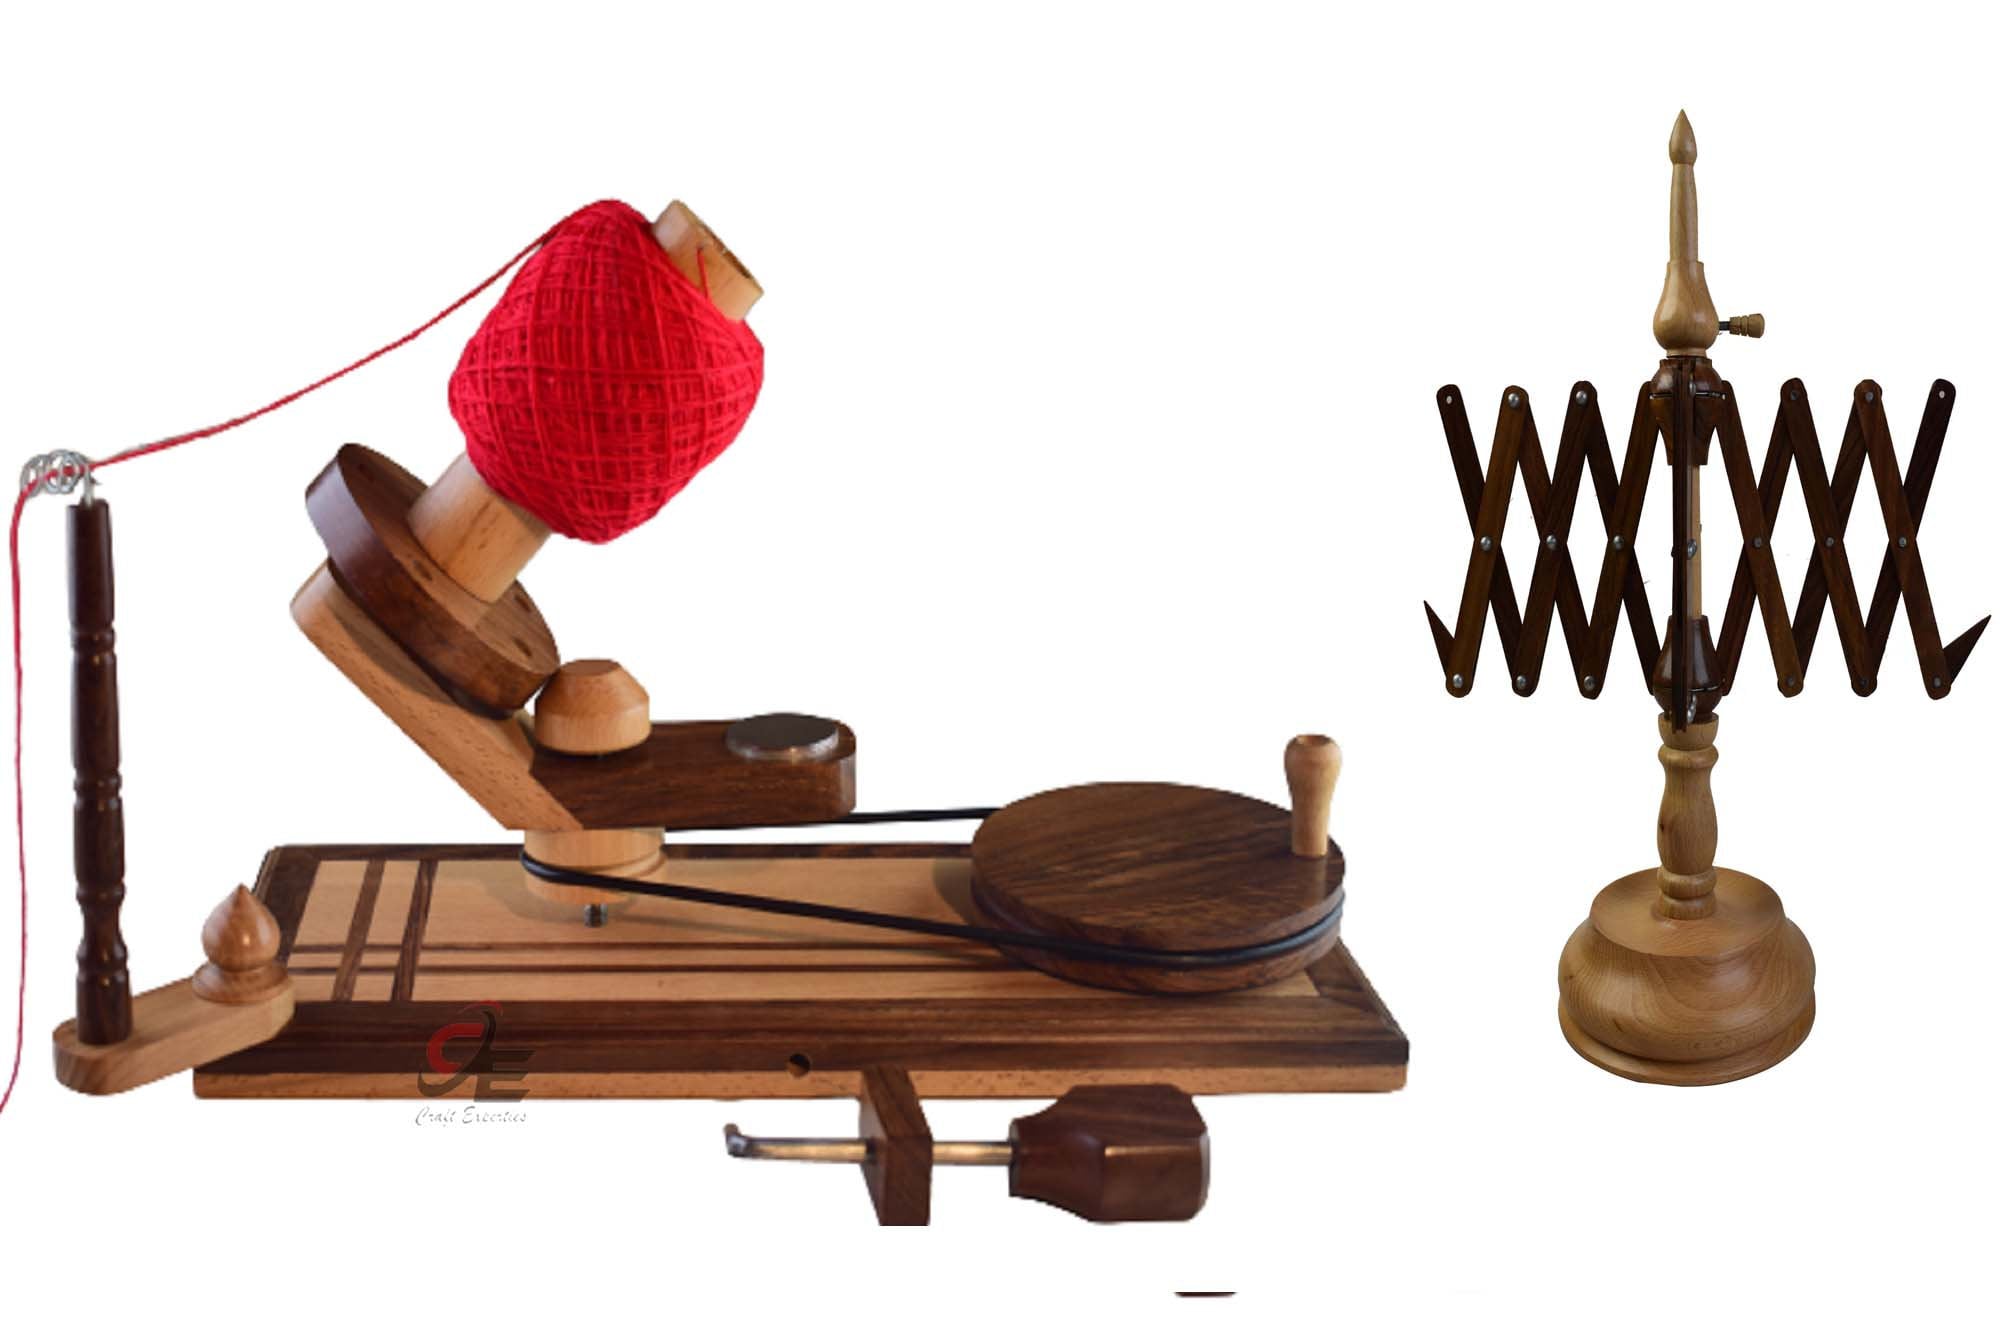 Wooden Yarn Winder and Swift Large Wooden Yarn Winder for Knitting